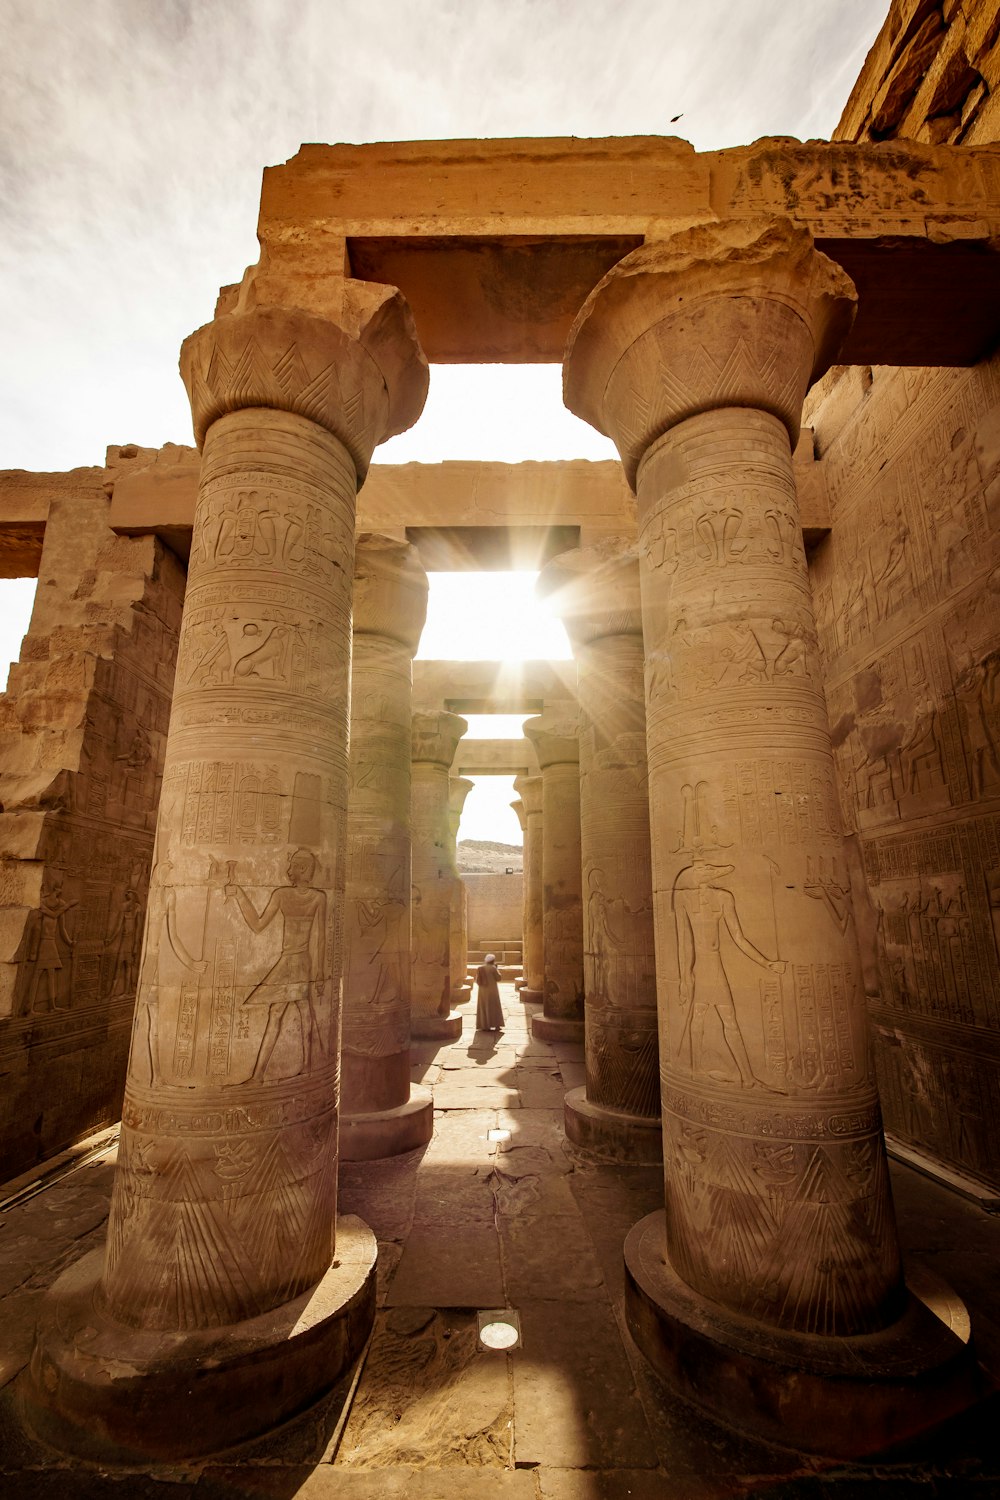 10 Great Facts about the City of Luxor in Egypt